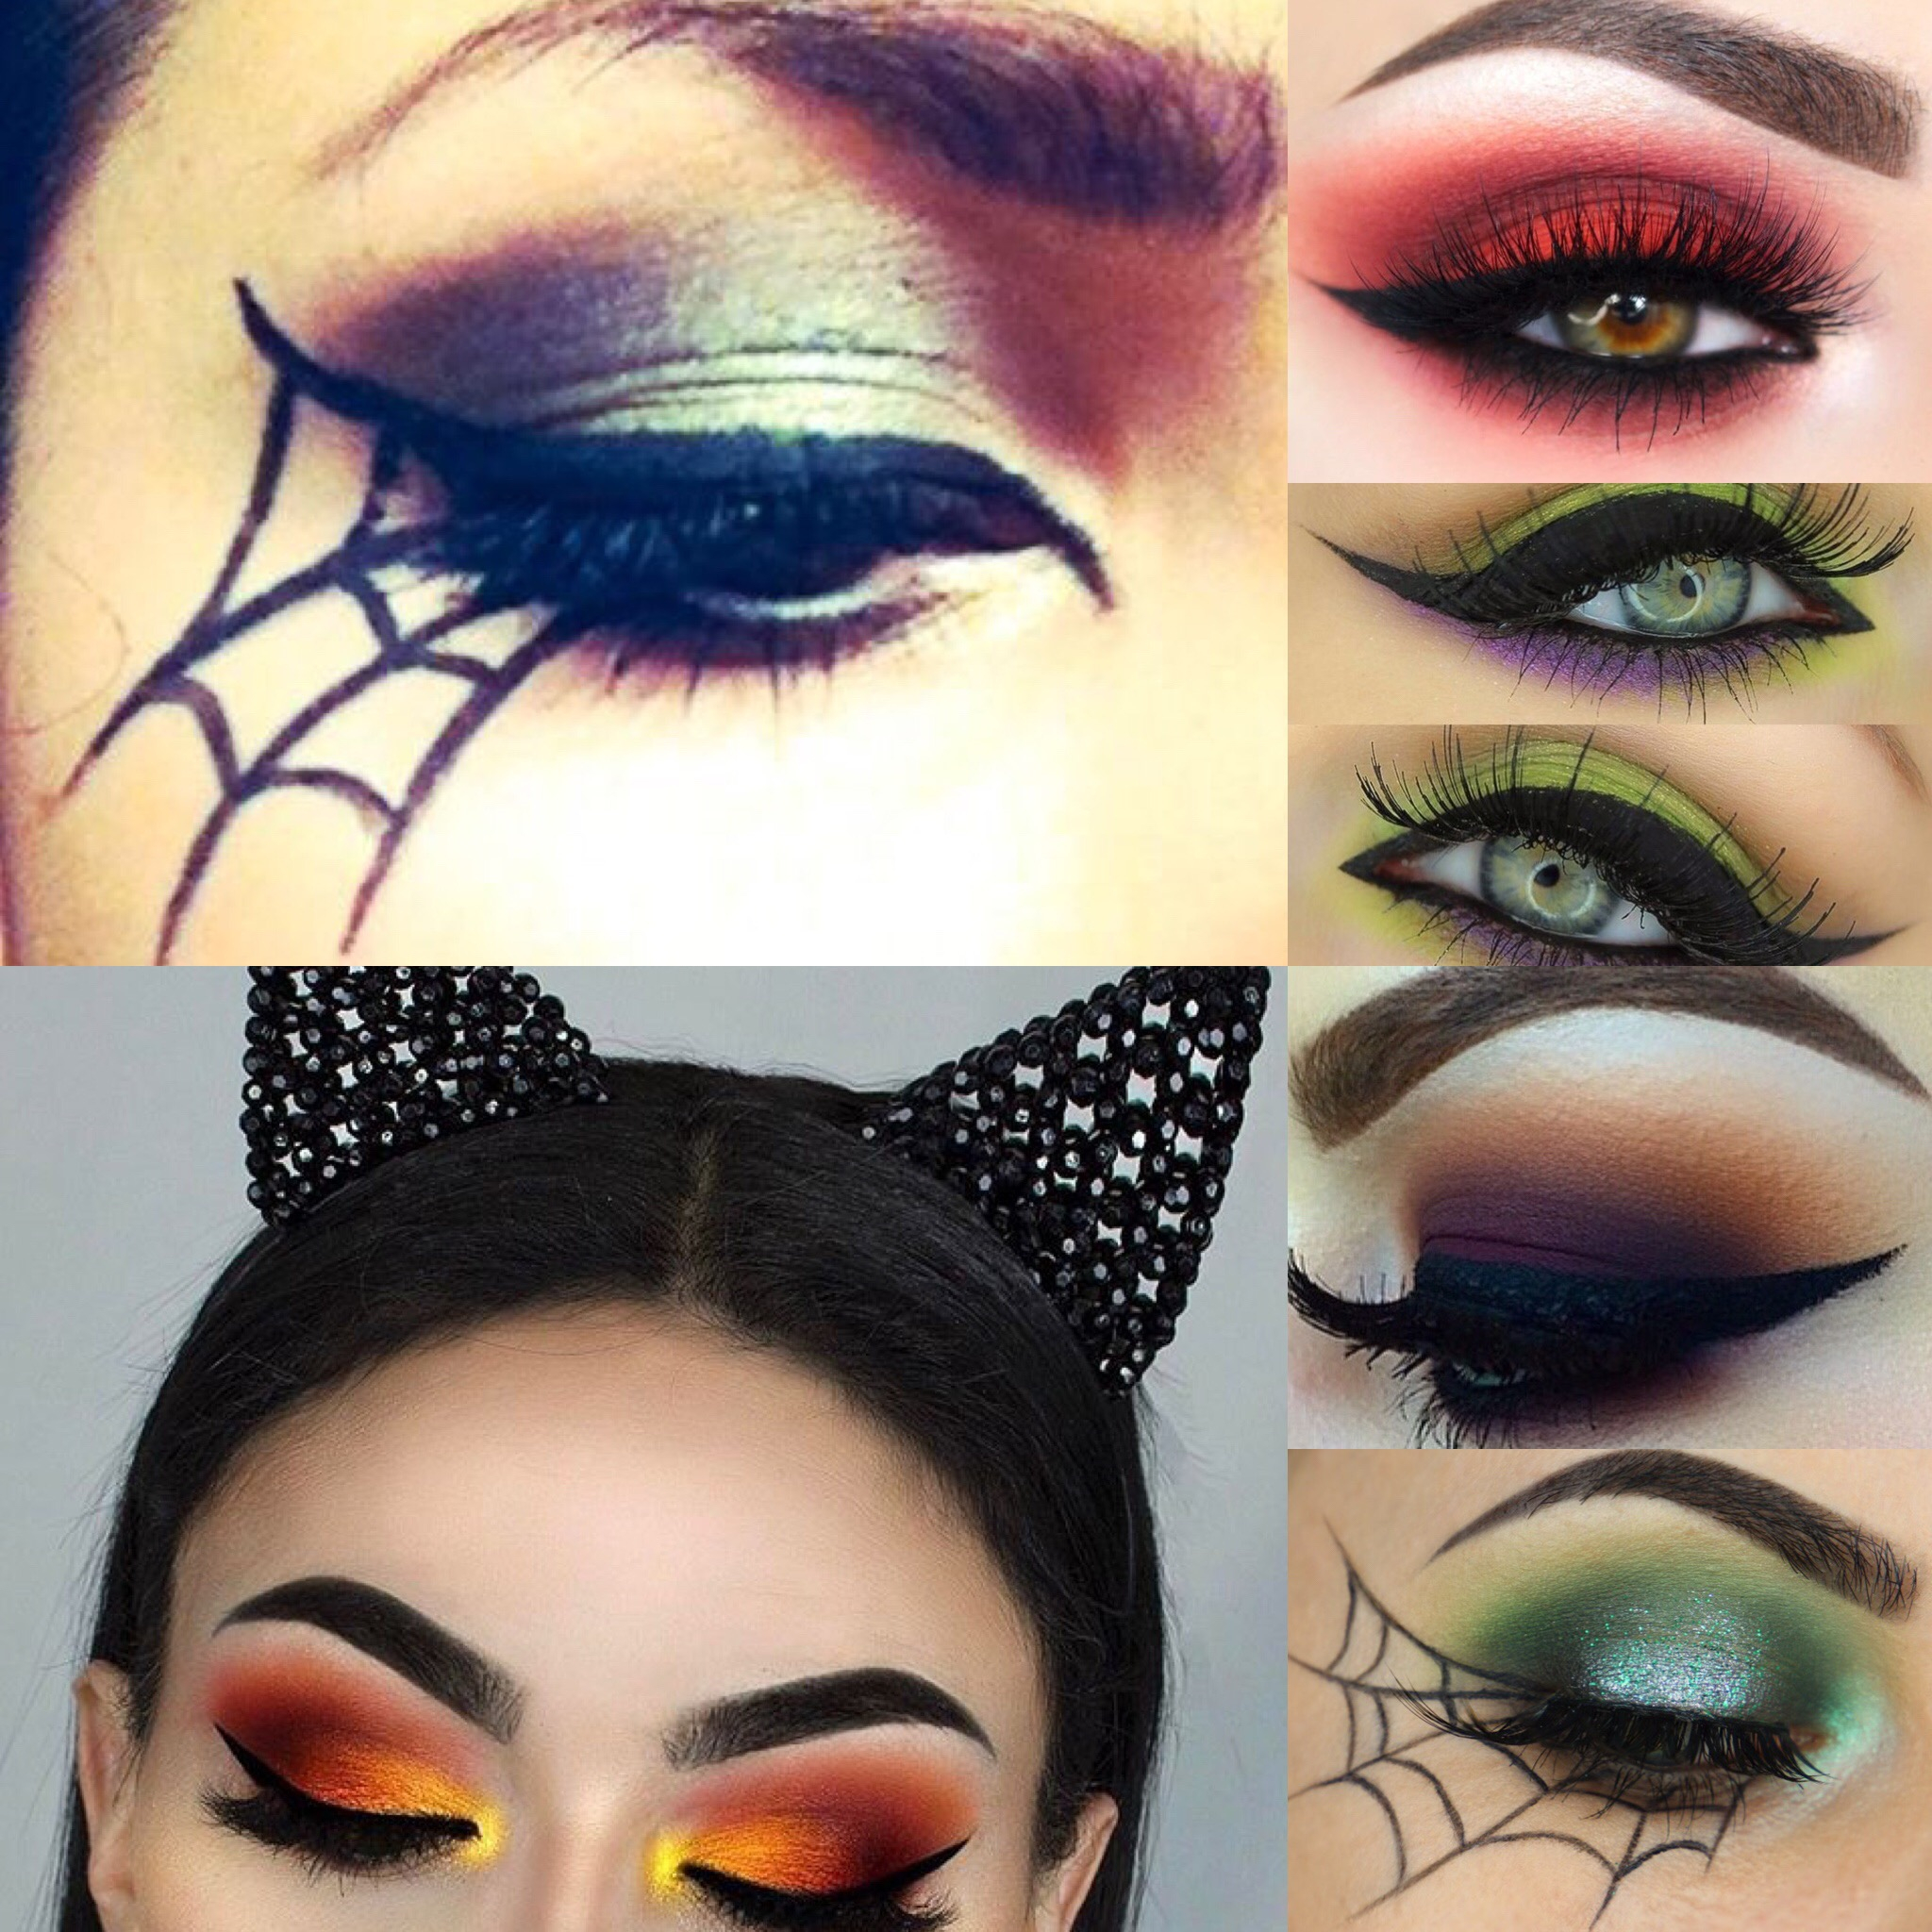 Eye Makeup For Halloween Halloween Eye Makeup Ideas To Try This Year